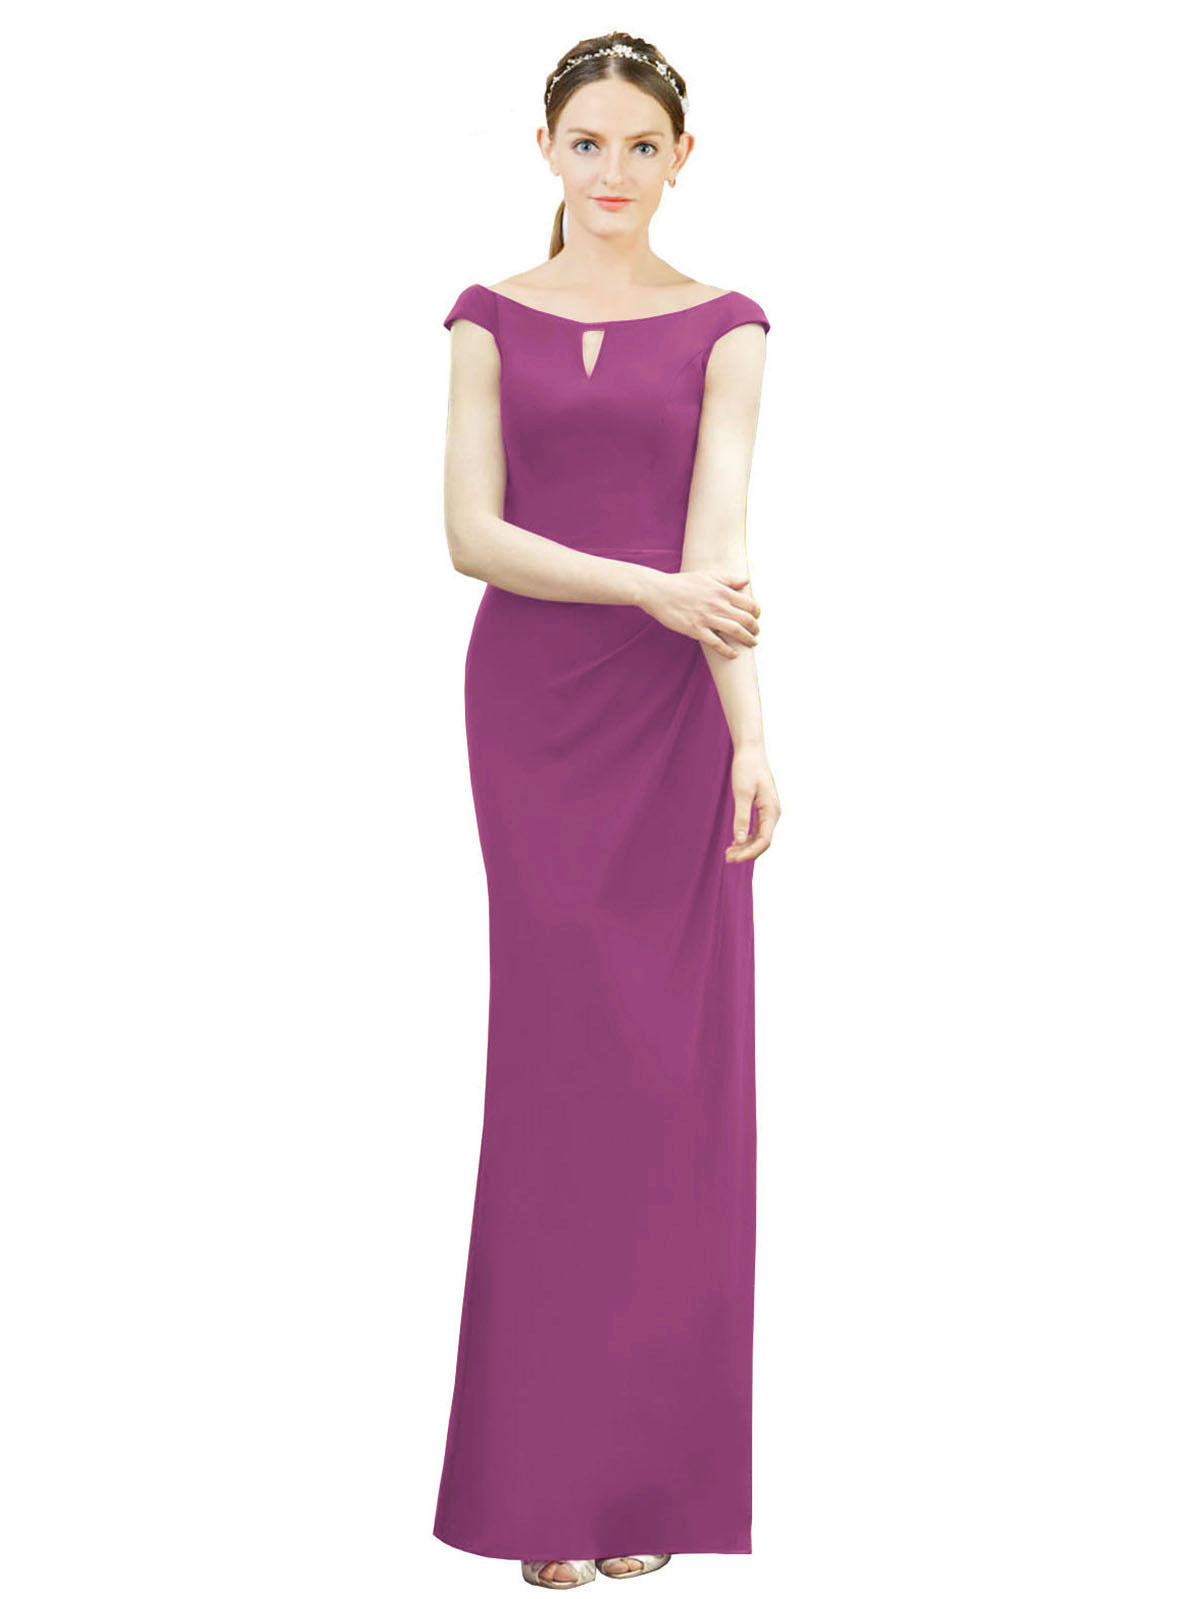 Wild Berry Mermaid, Fit and Flare Bateau, High Neck Sleeveless Long Bridesmaid Dress Emilee 